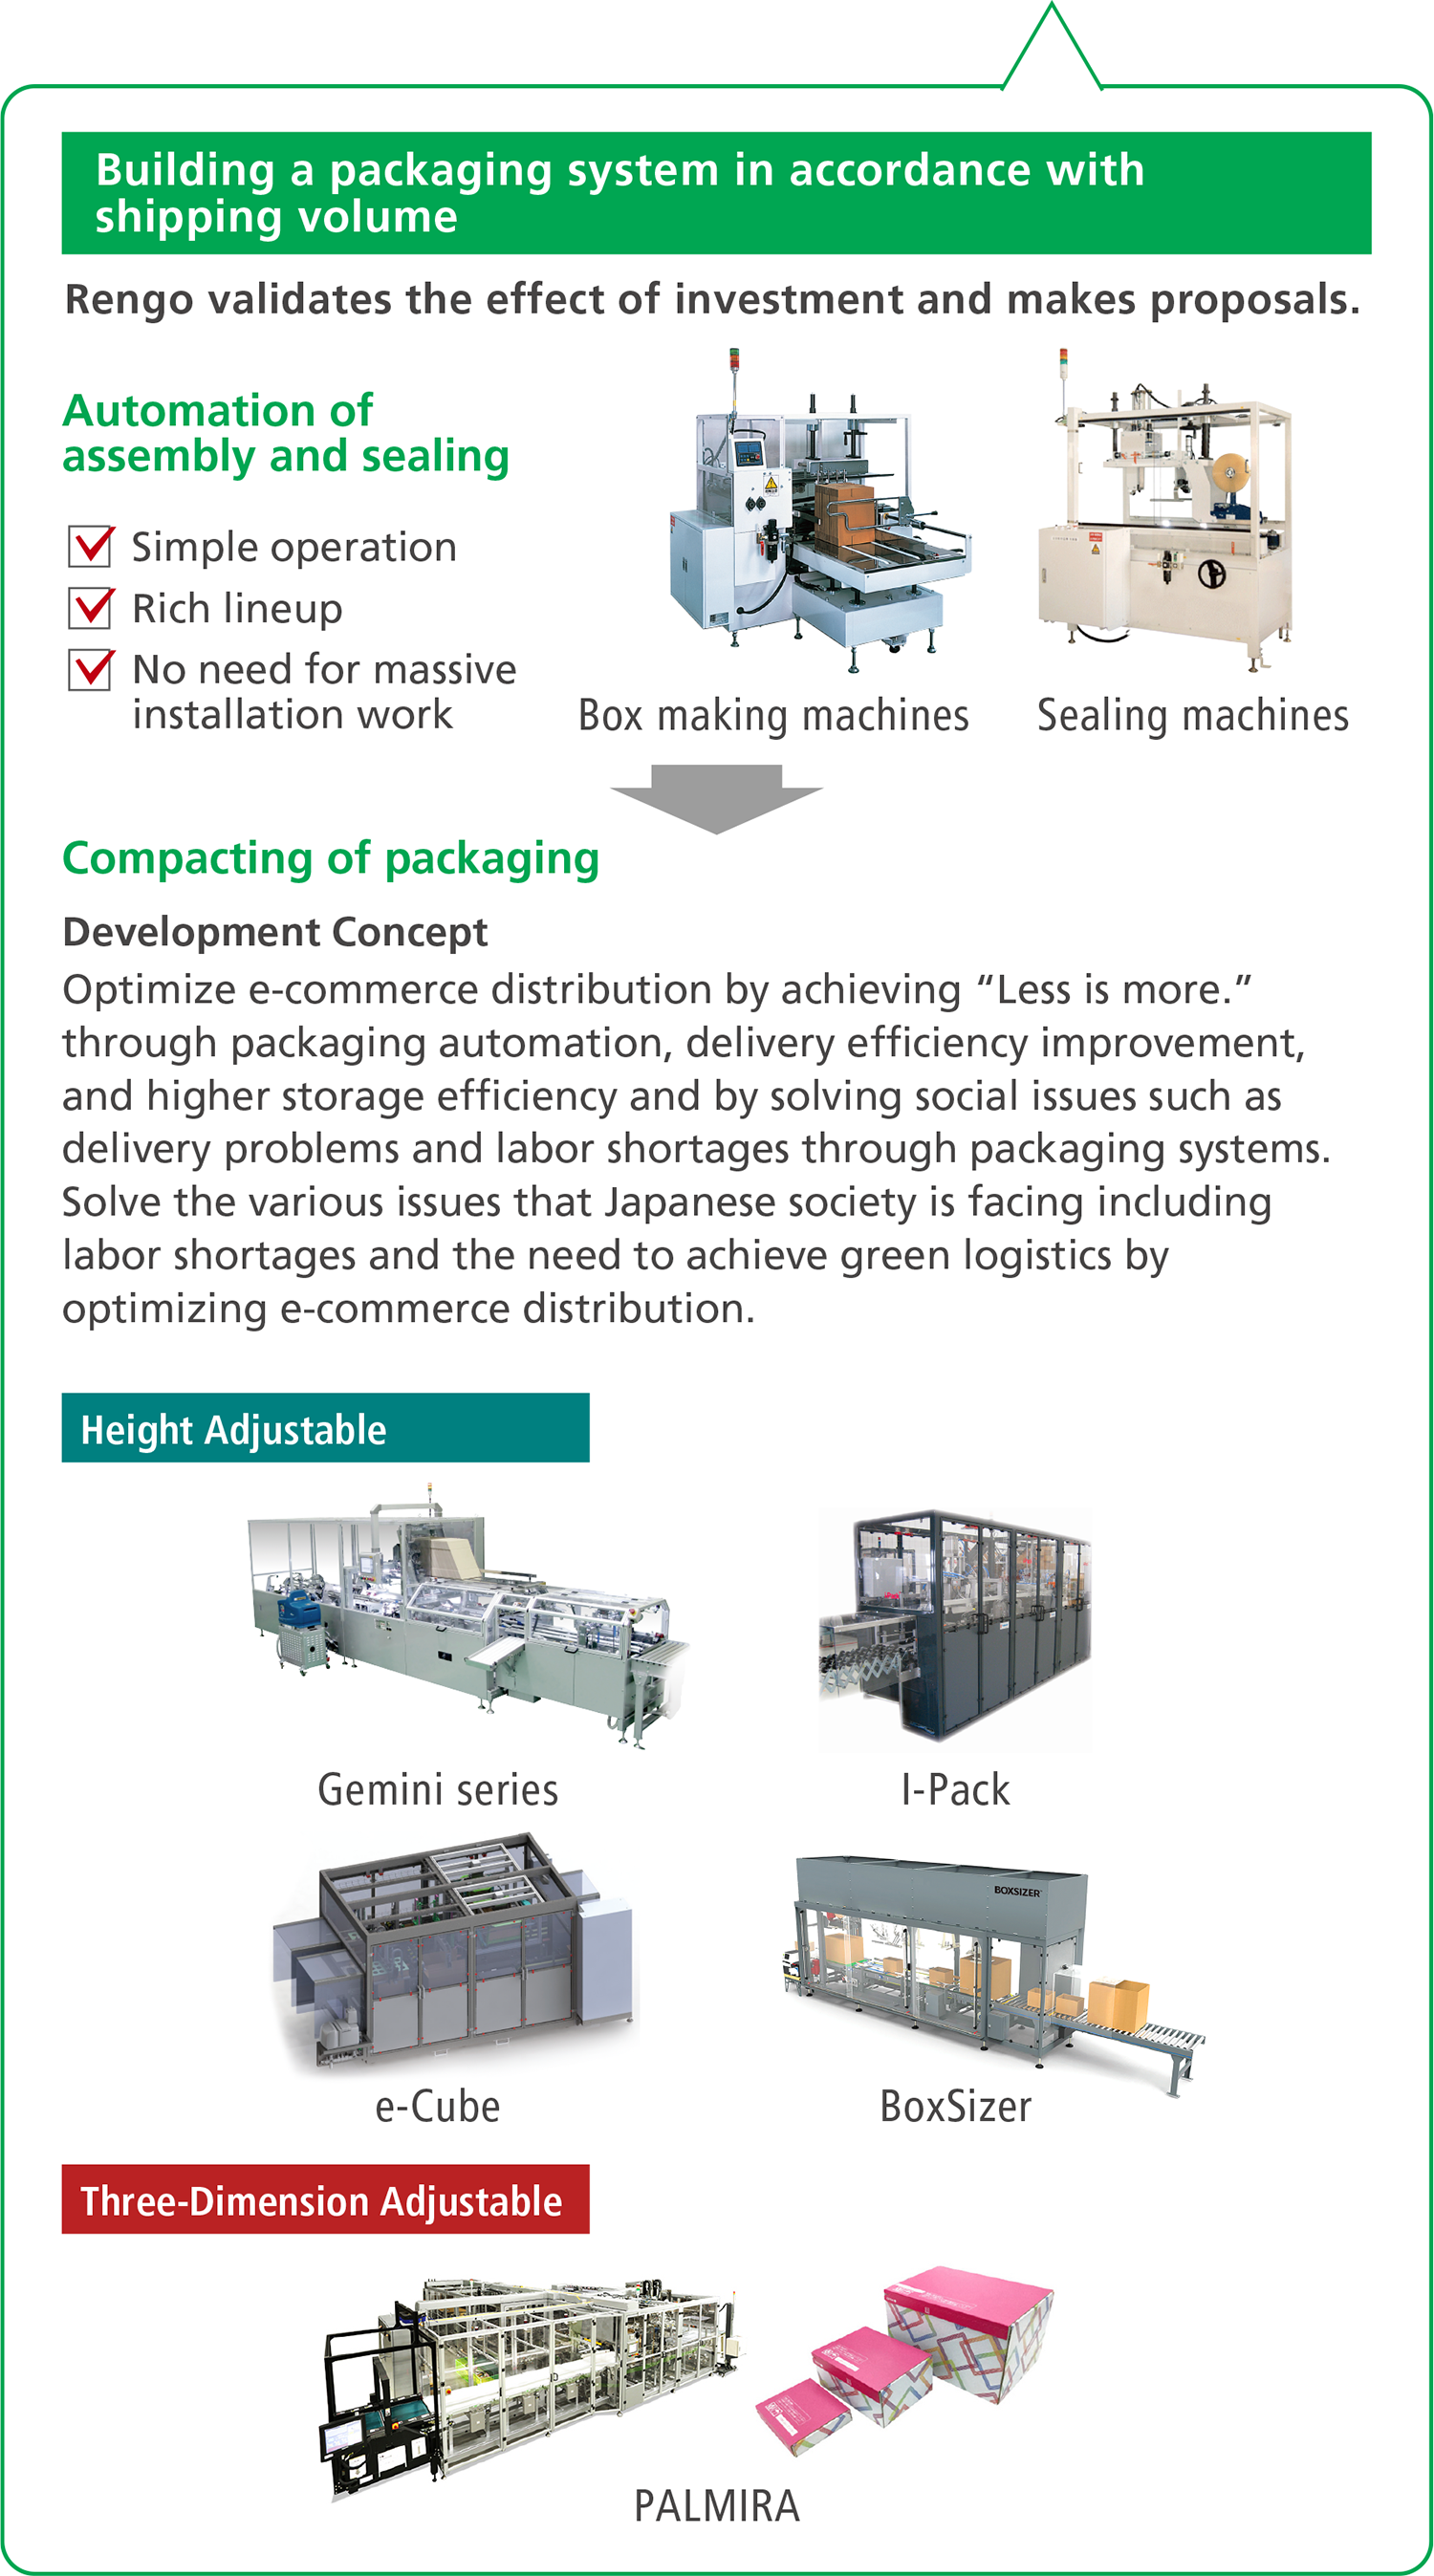 Building a packaging system in accordance with shipping volume